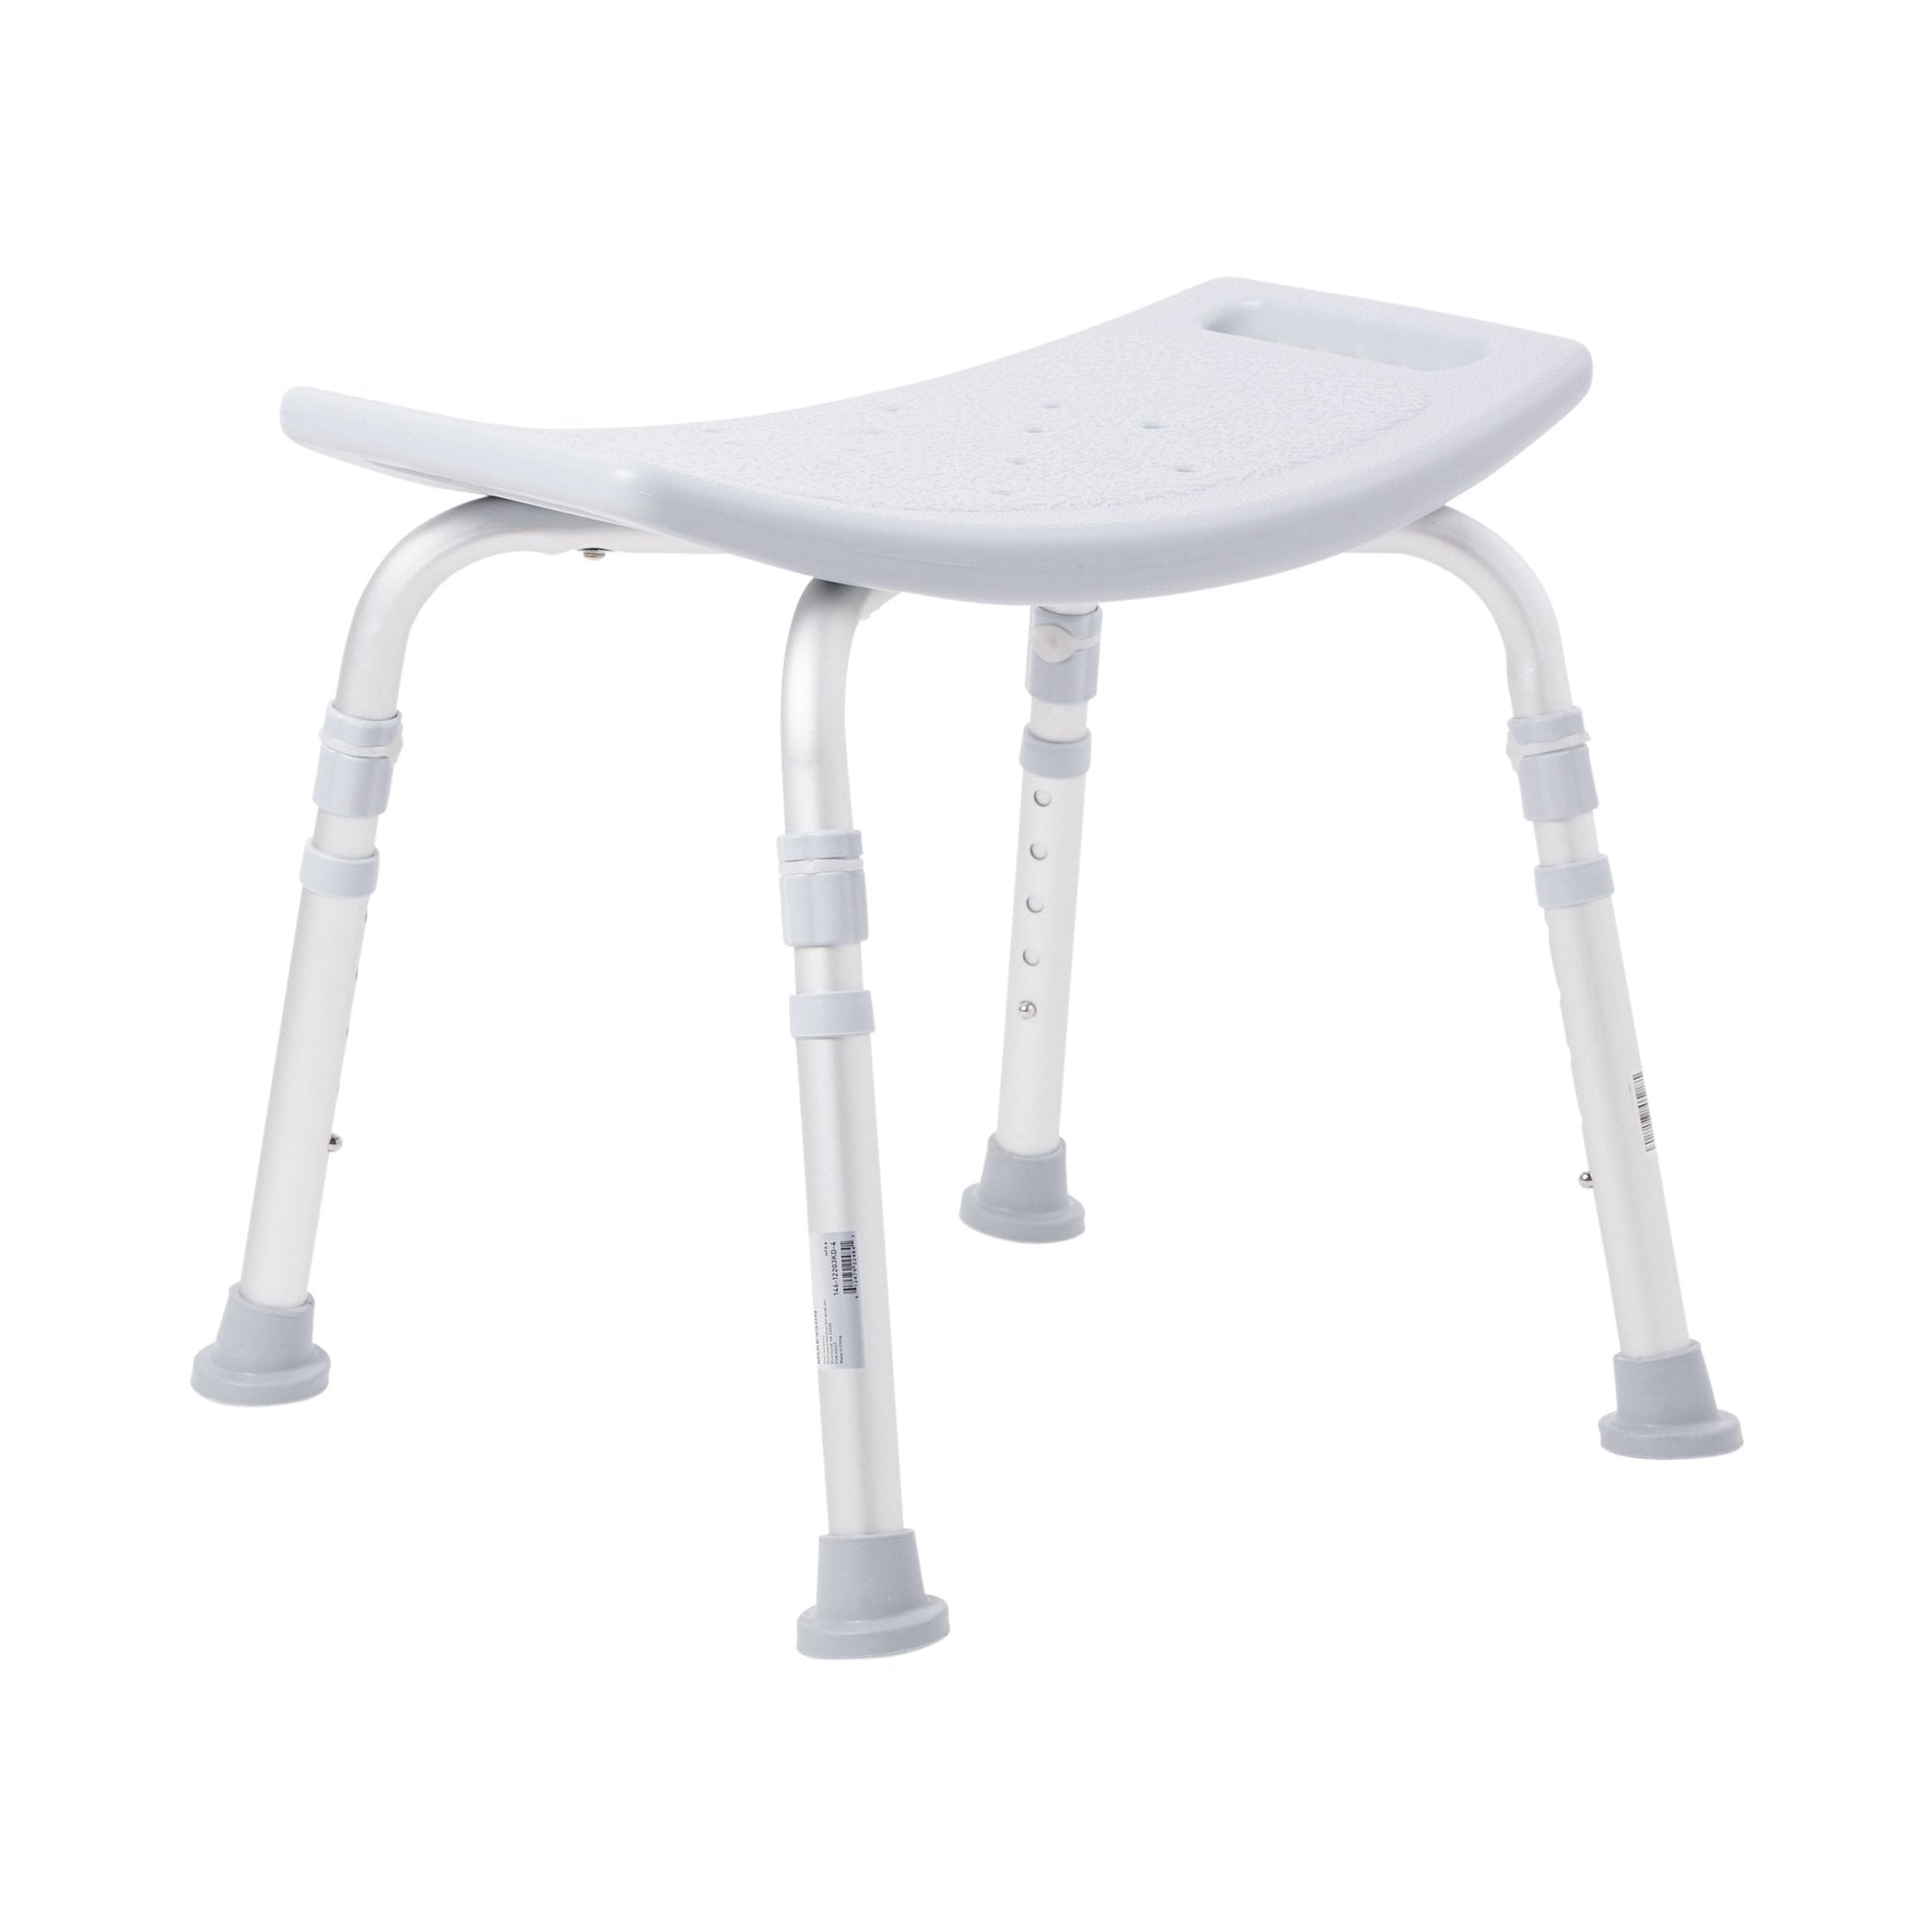 Bath Bench McKesson Without Arms Aluminum Frame Without Backrest 19-1/4 Inch Seat Width 300 lbs. Weight Capacity